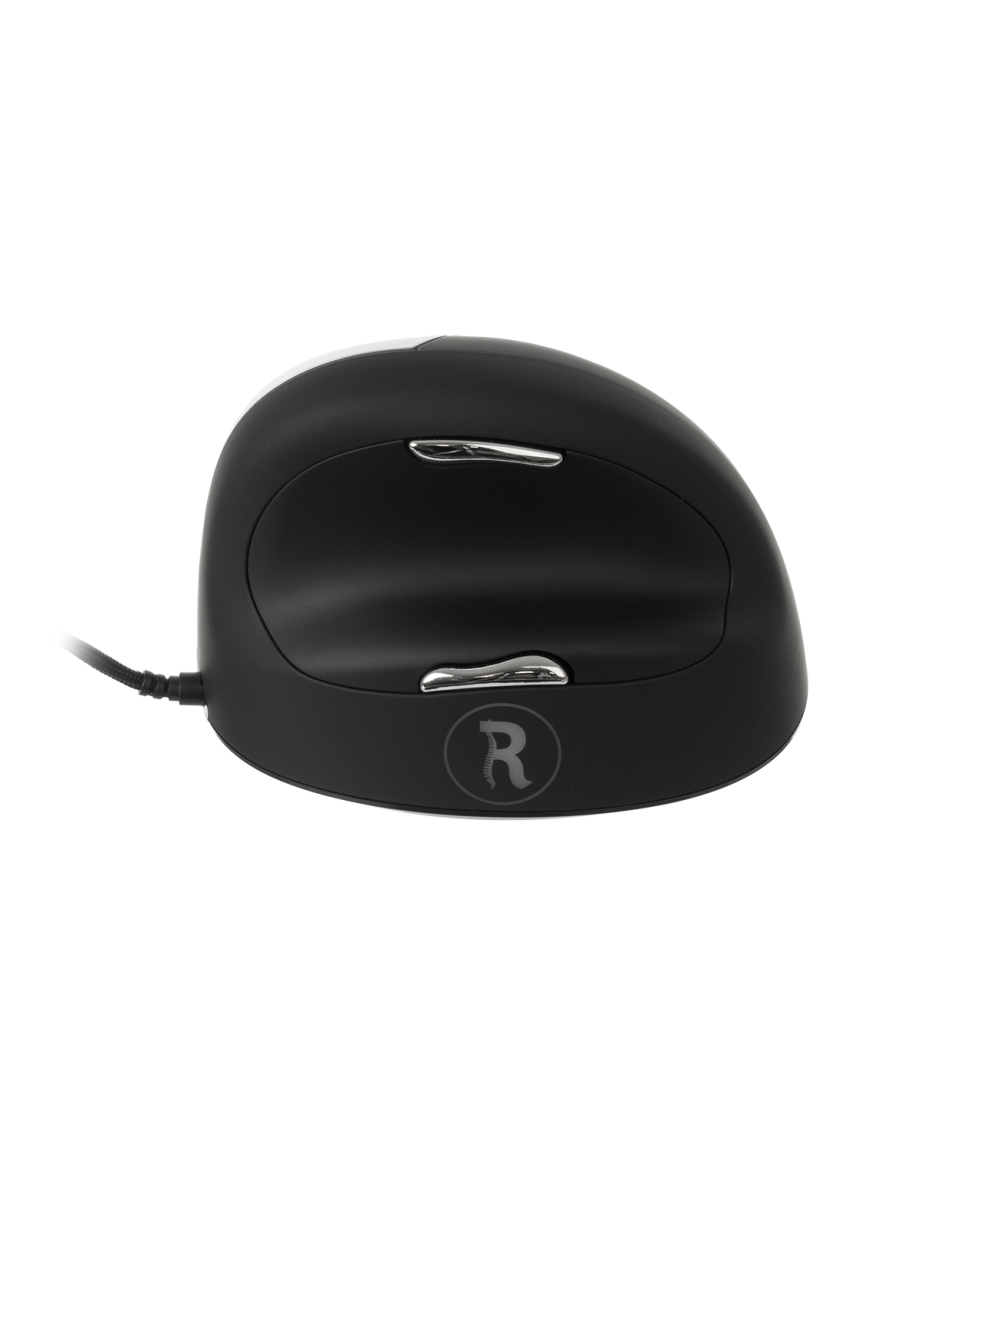 Vertical Ergonomic Mouse -  HE Vertical Mouse Right Large